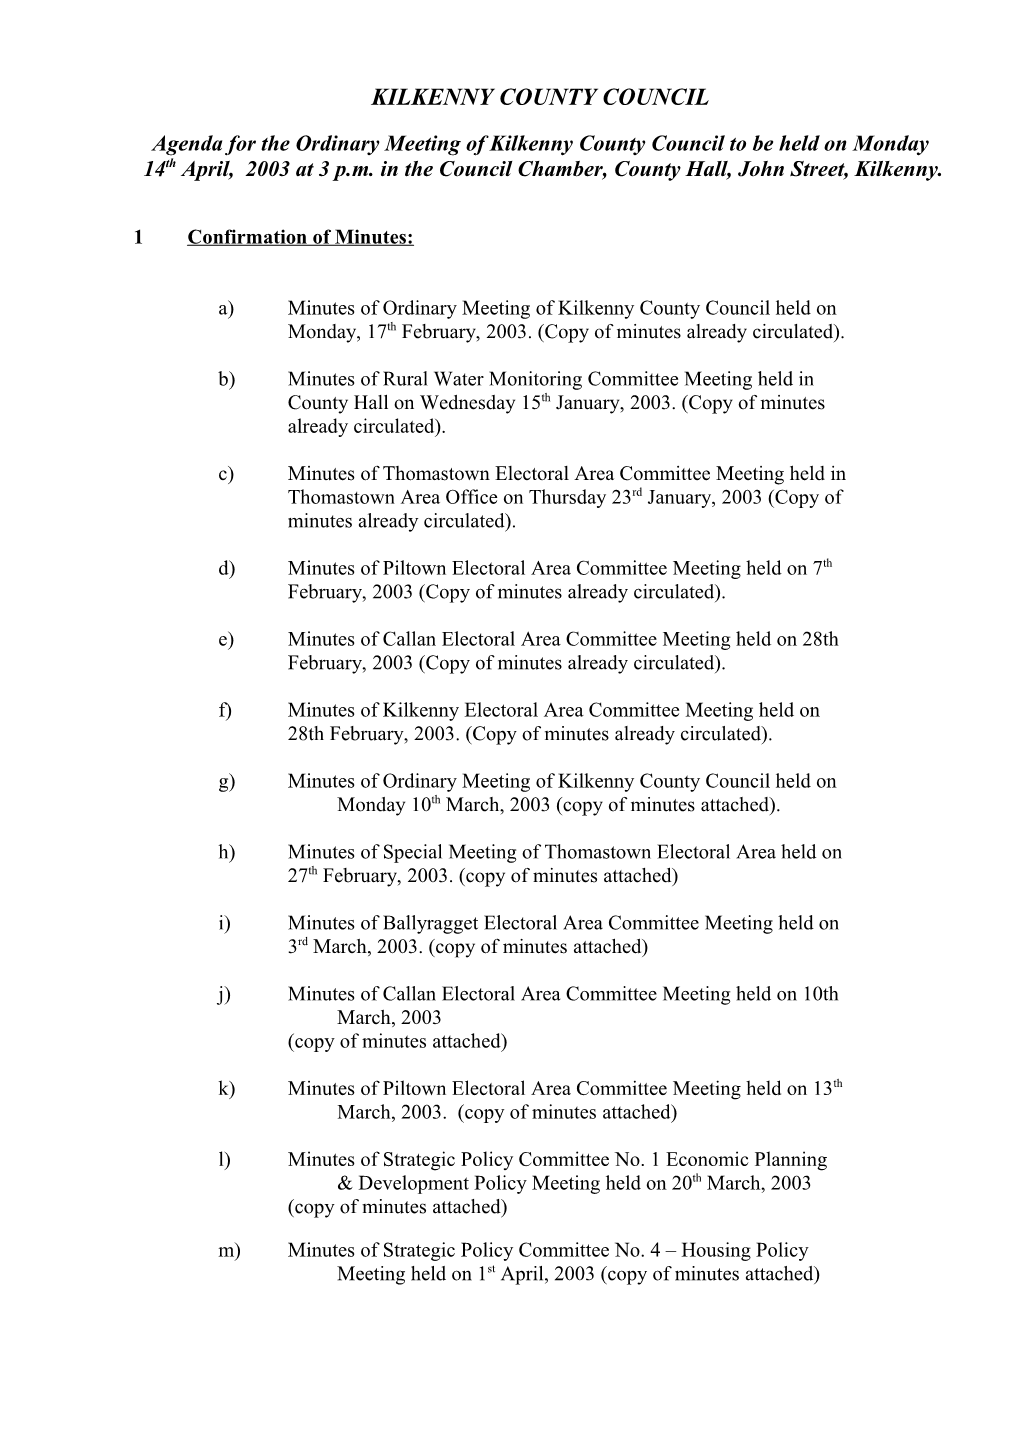 Agenda for the Ordinary Meeting of Kilkenny County Council to Be Held on Monday 14Th April, 2003